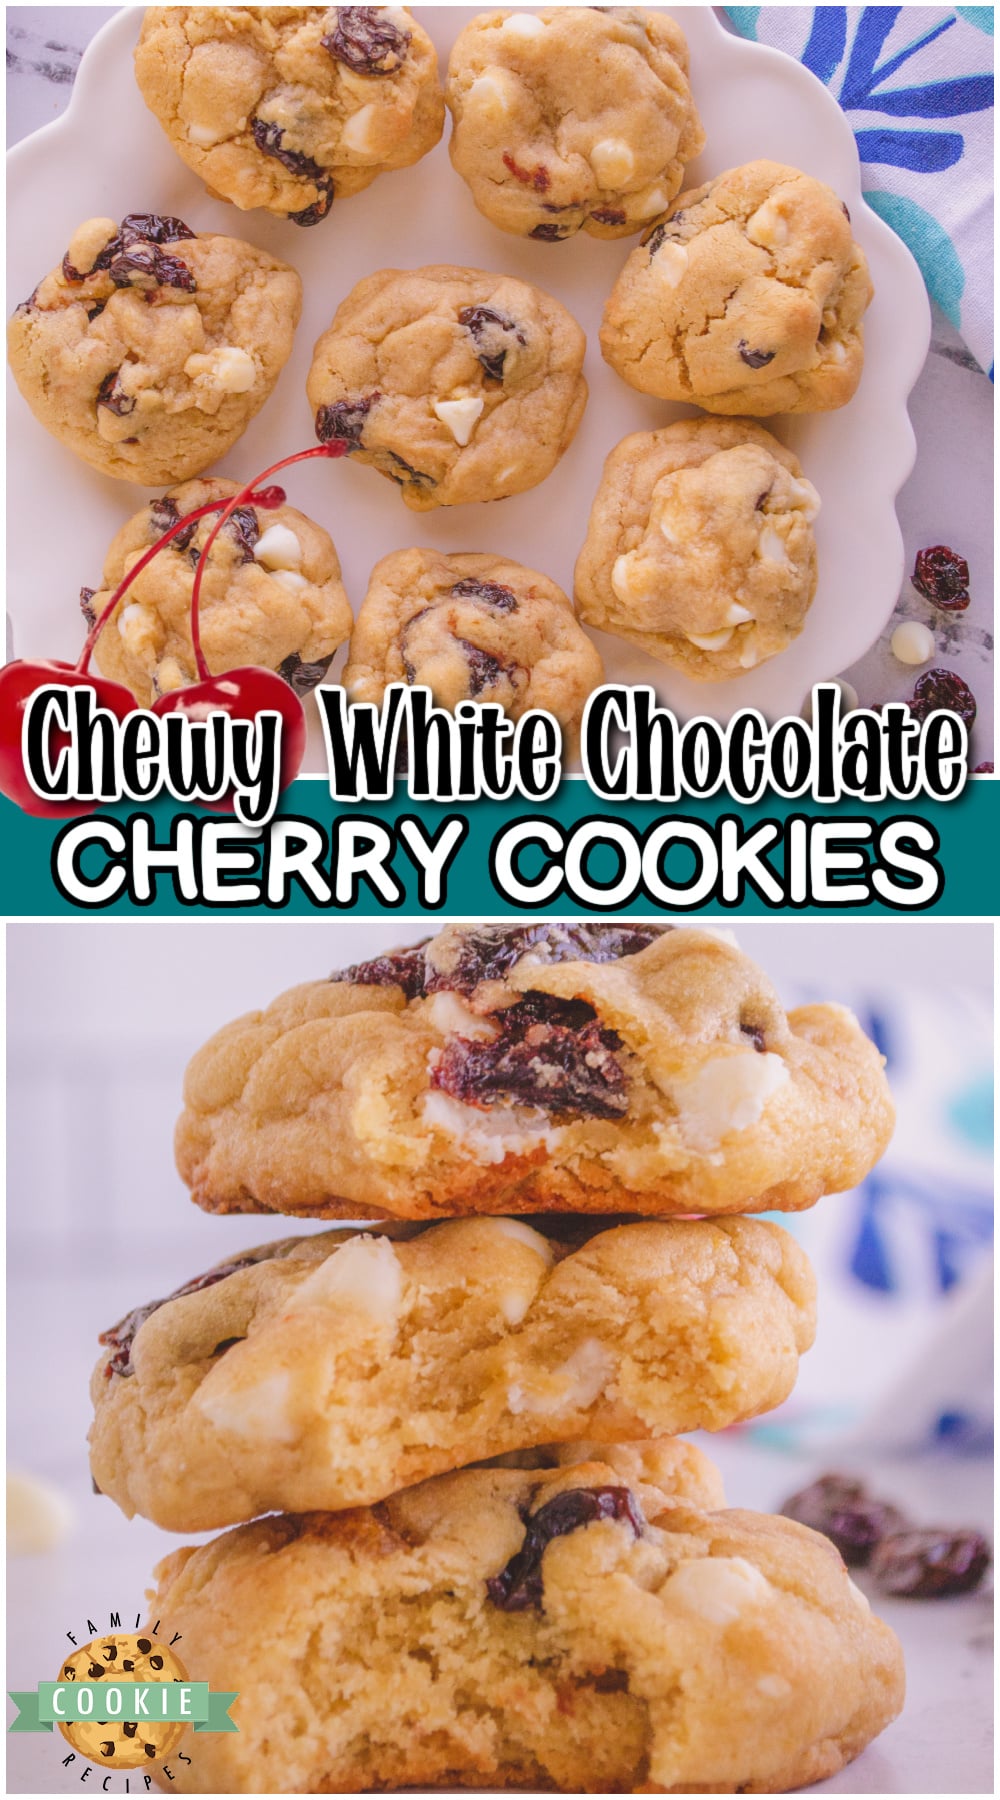 White Chocolate Cherry Cookies are sweet & chewy homemade cookies bursting with bright cherry flavor! Cherry cookies made with white chocolate chips perfect for any time! 